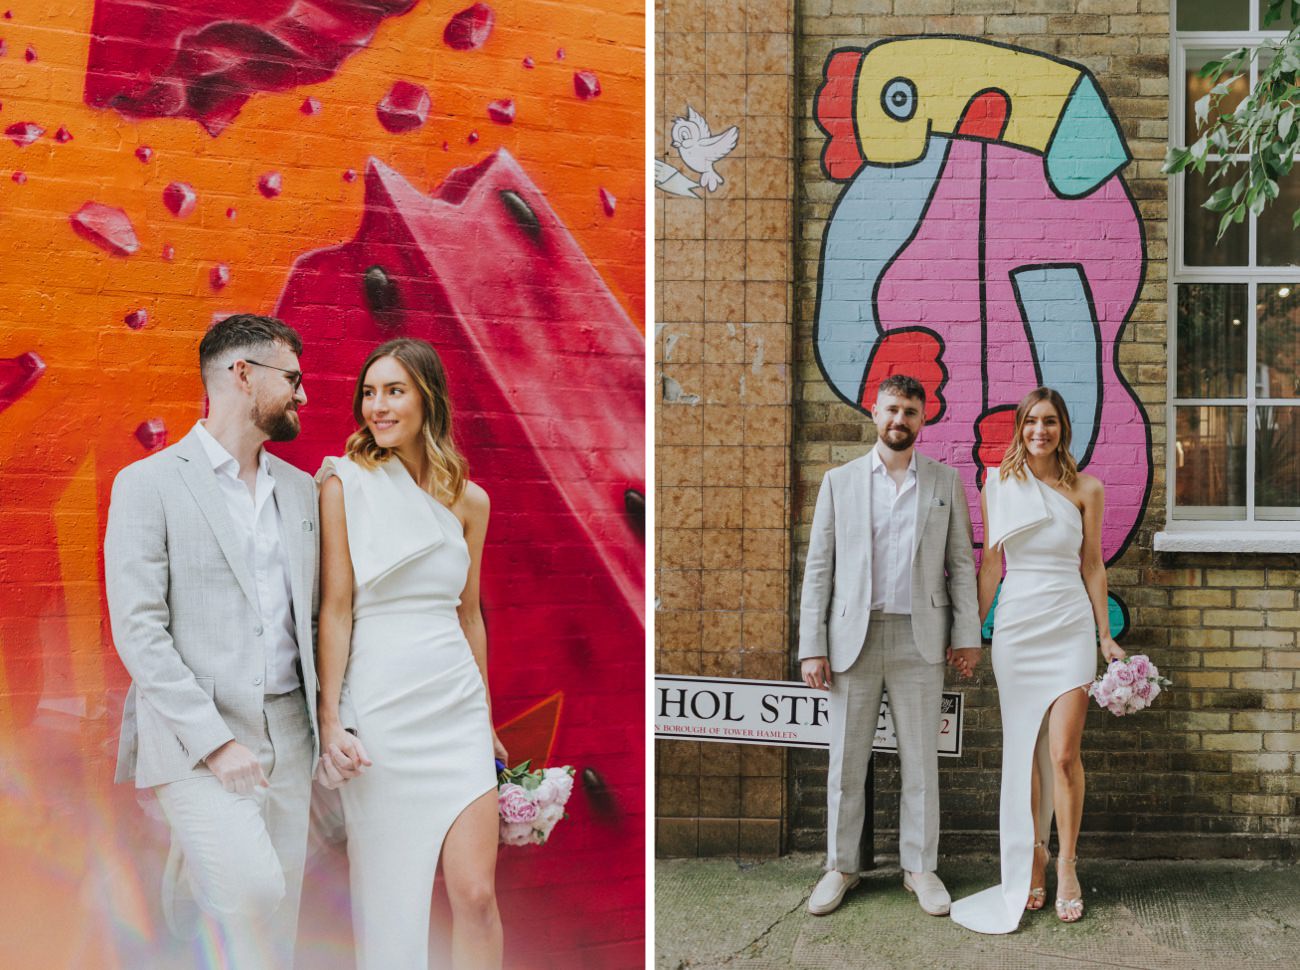 Bride and Groom portraits in front of street art in Shoreditch London.